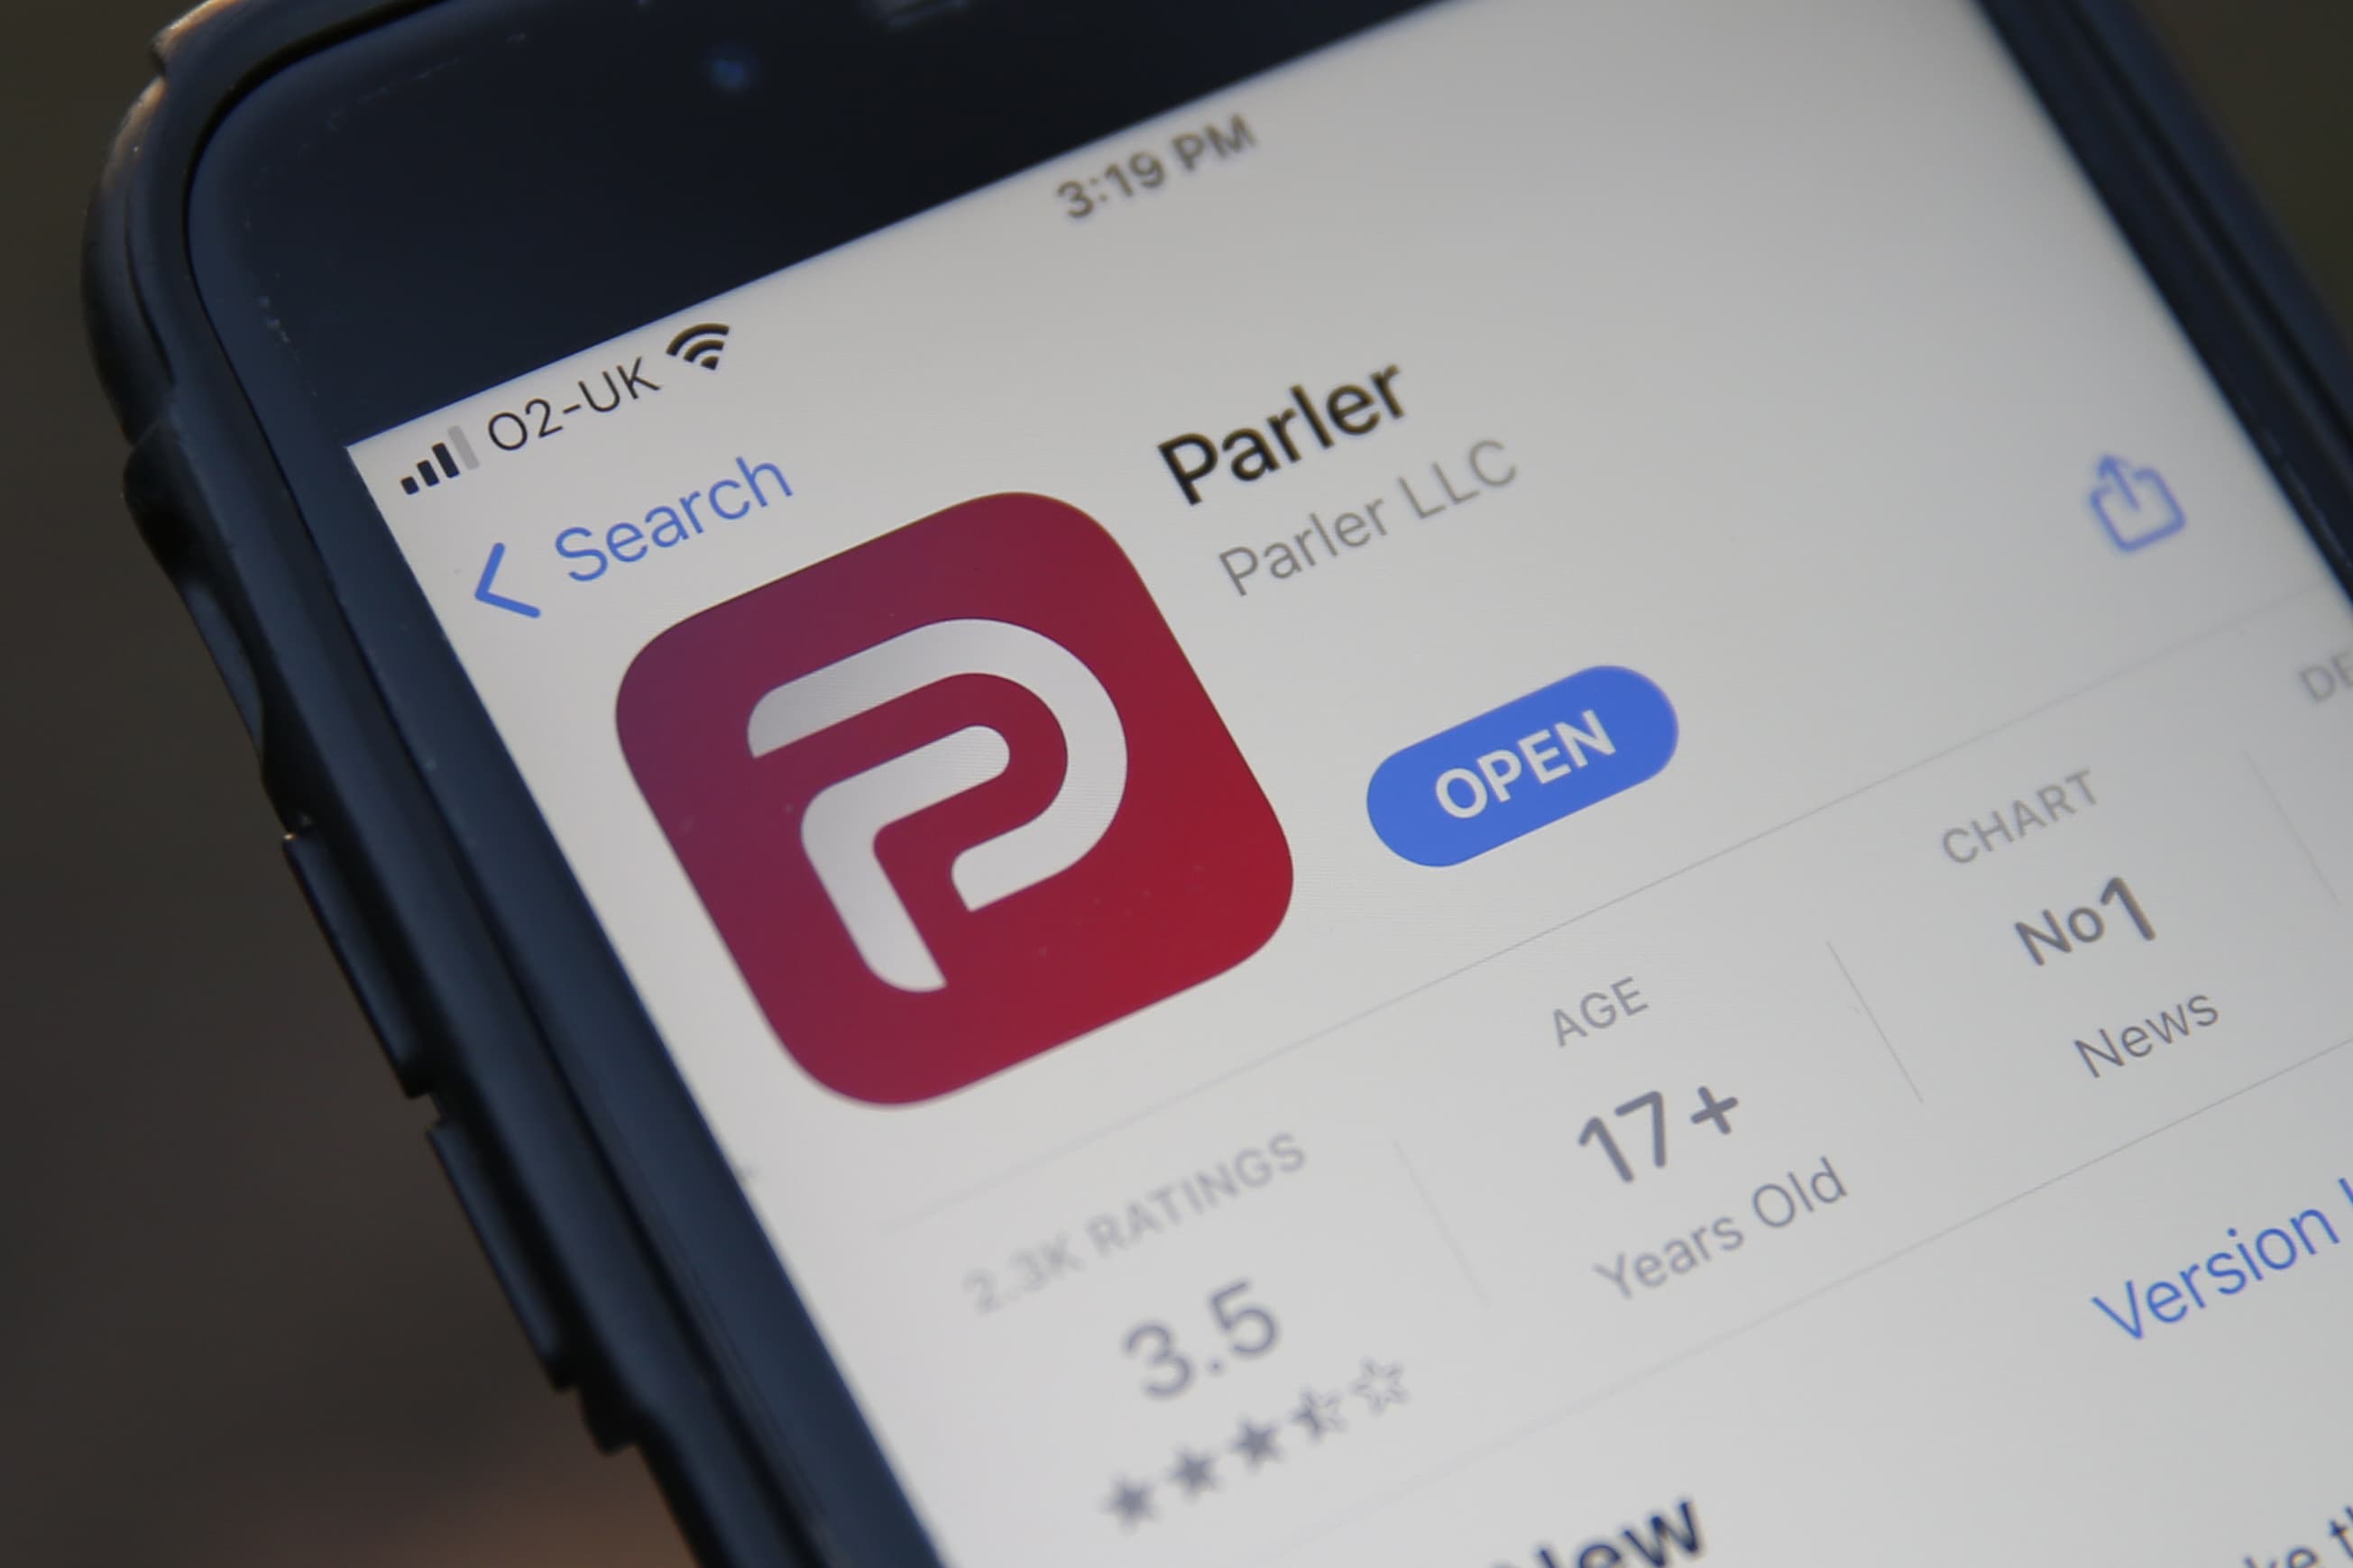 Parler CEO says app will be offline 'longer than expected' because of Amazon, Apple and Google